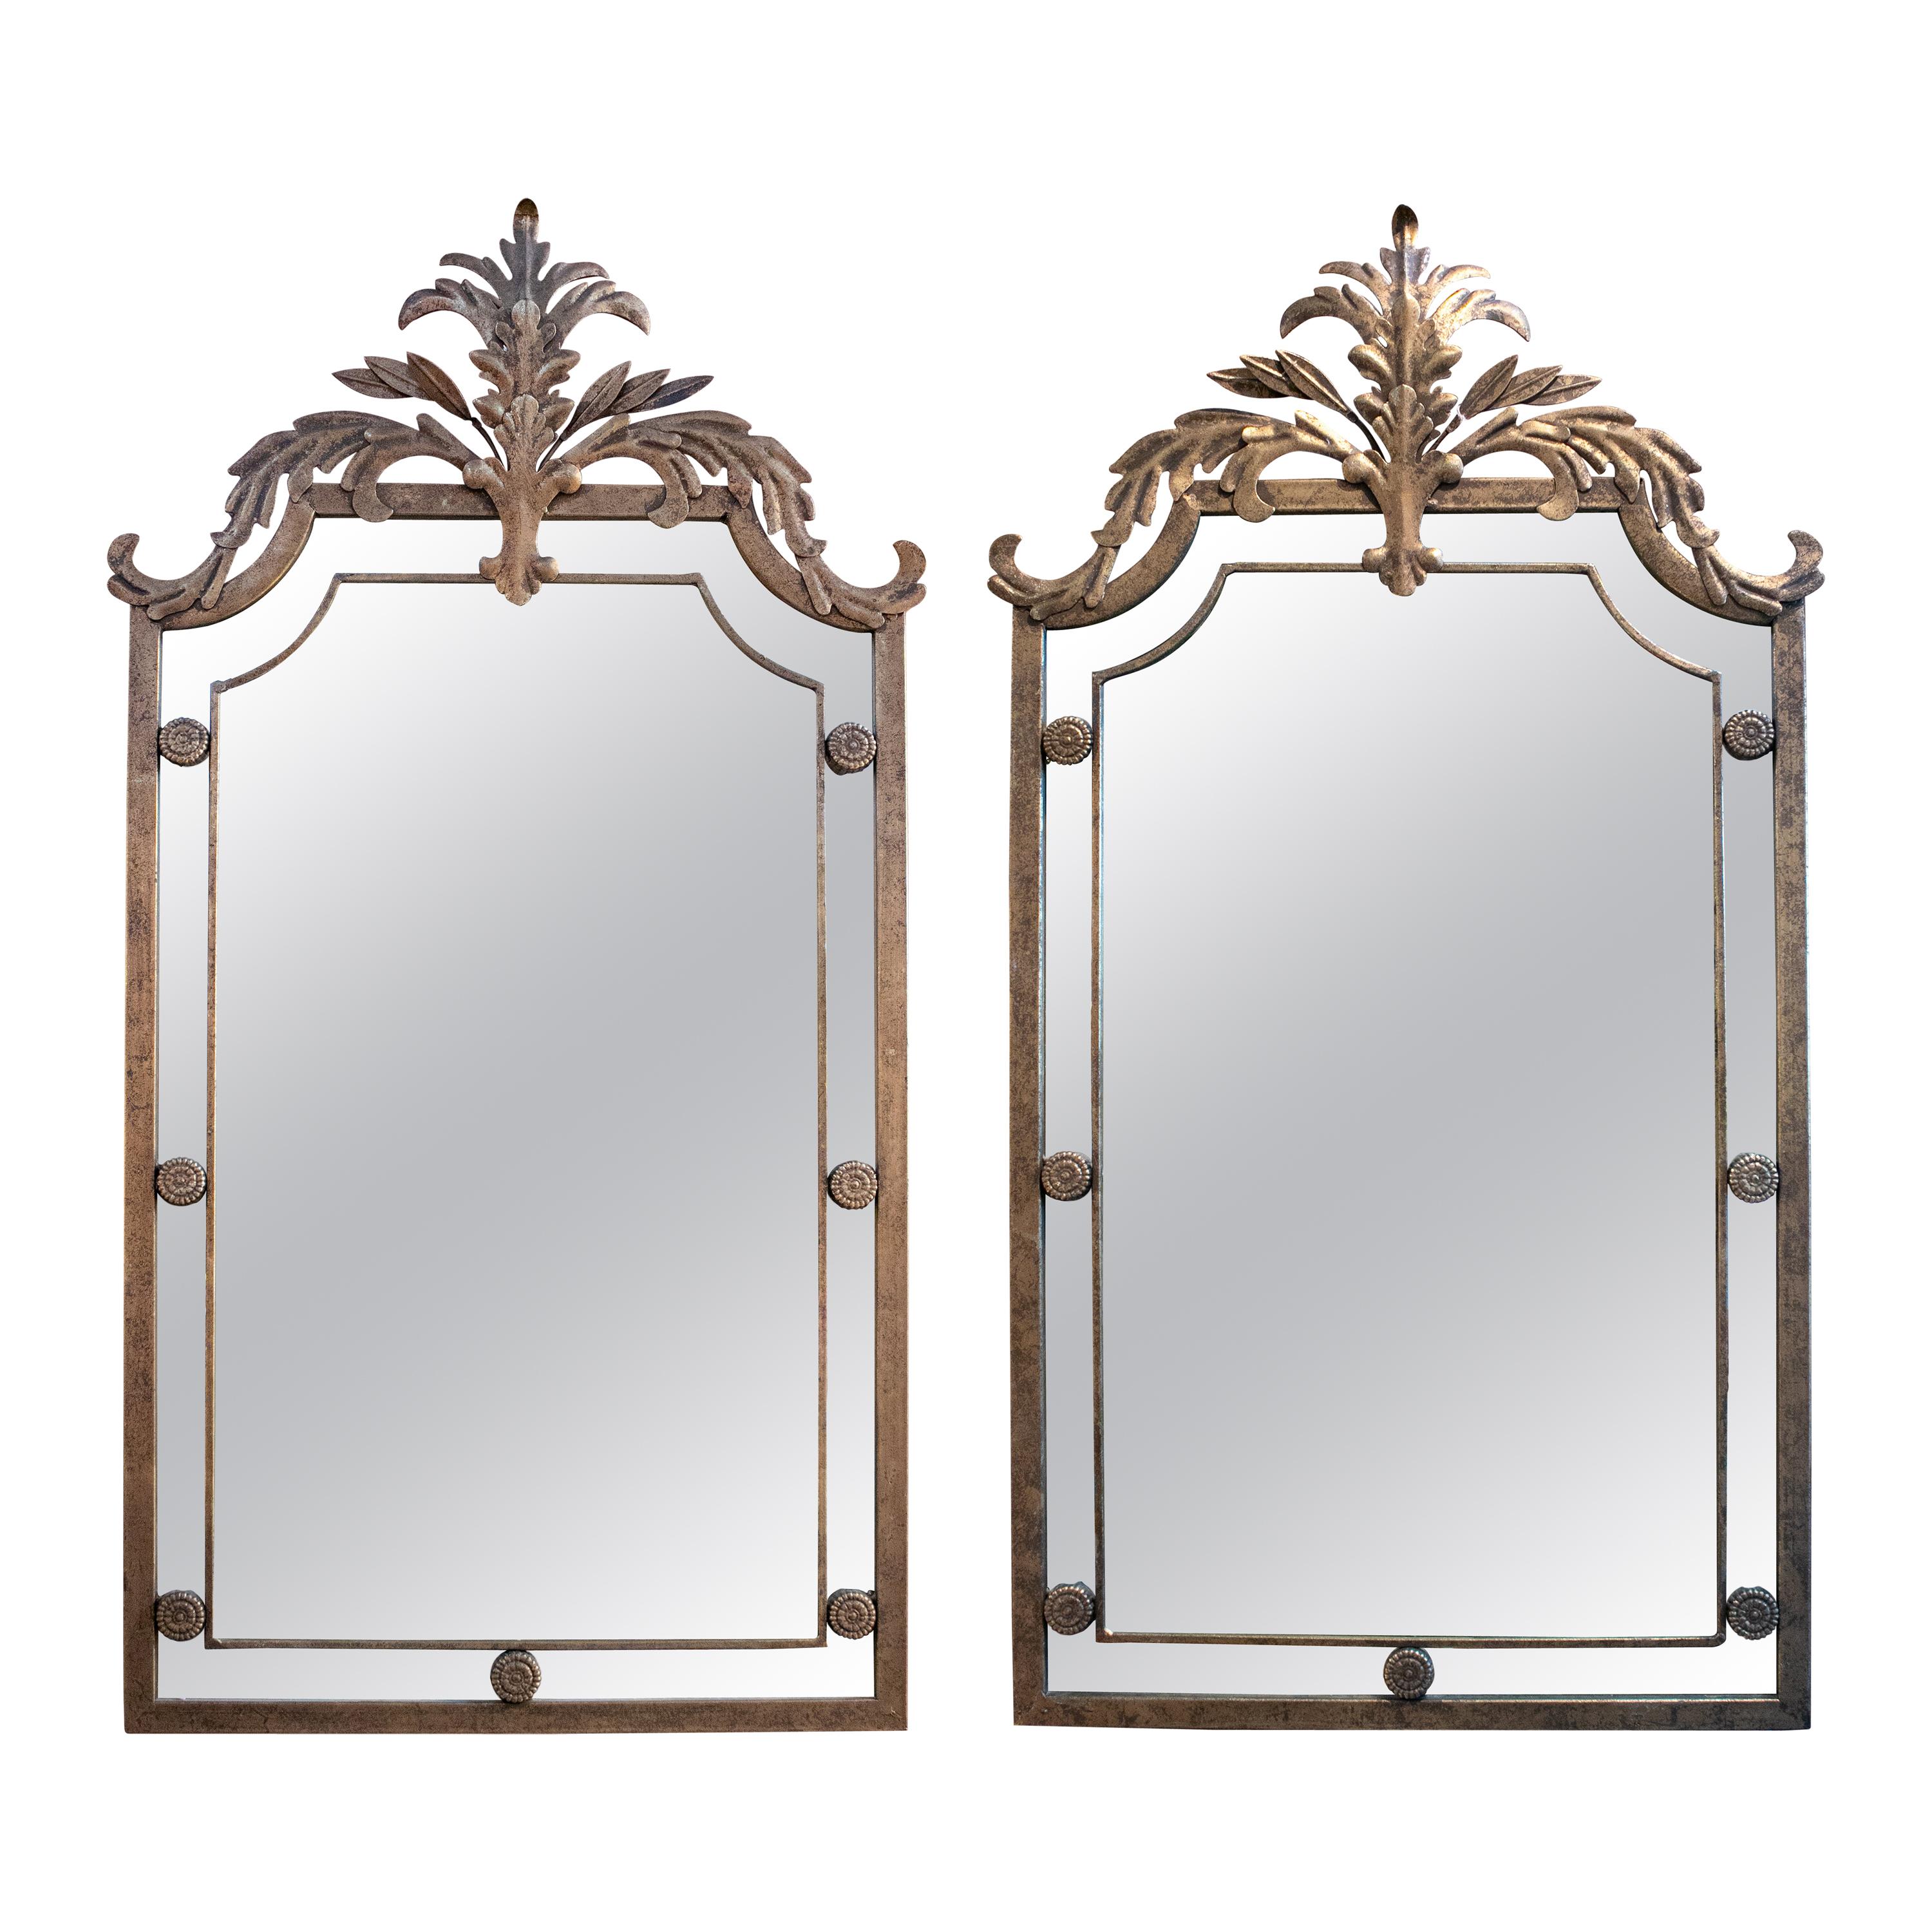 1970s Pair of French Mirrors with Ornamental Crest Iron Frame